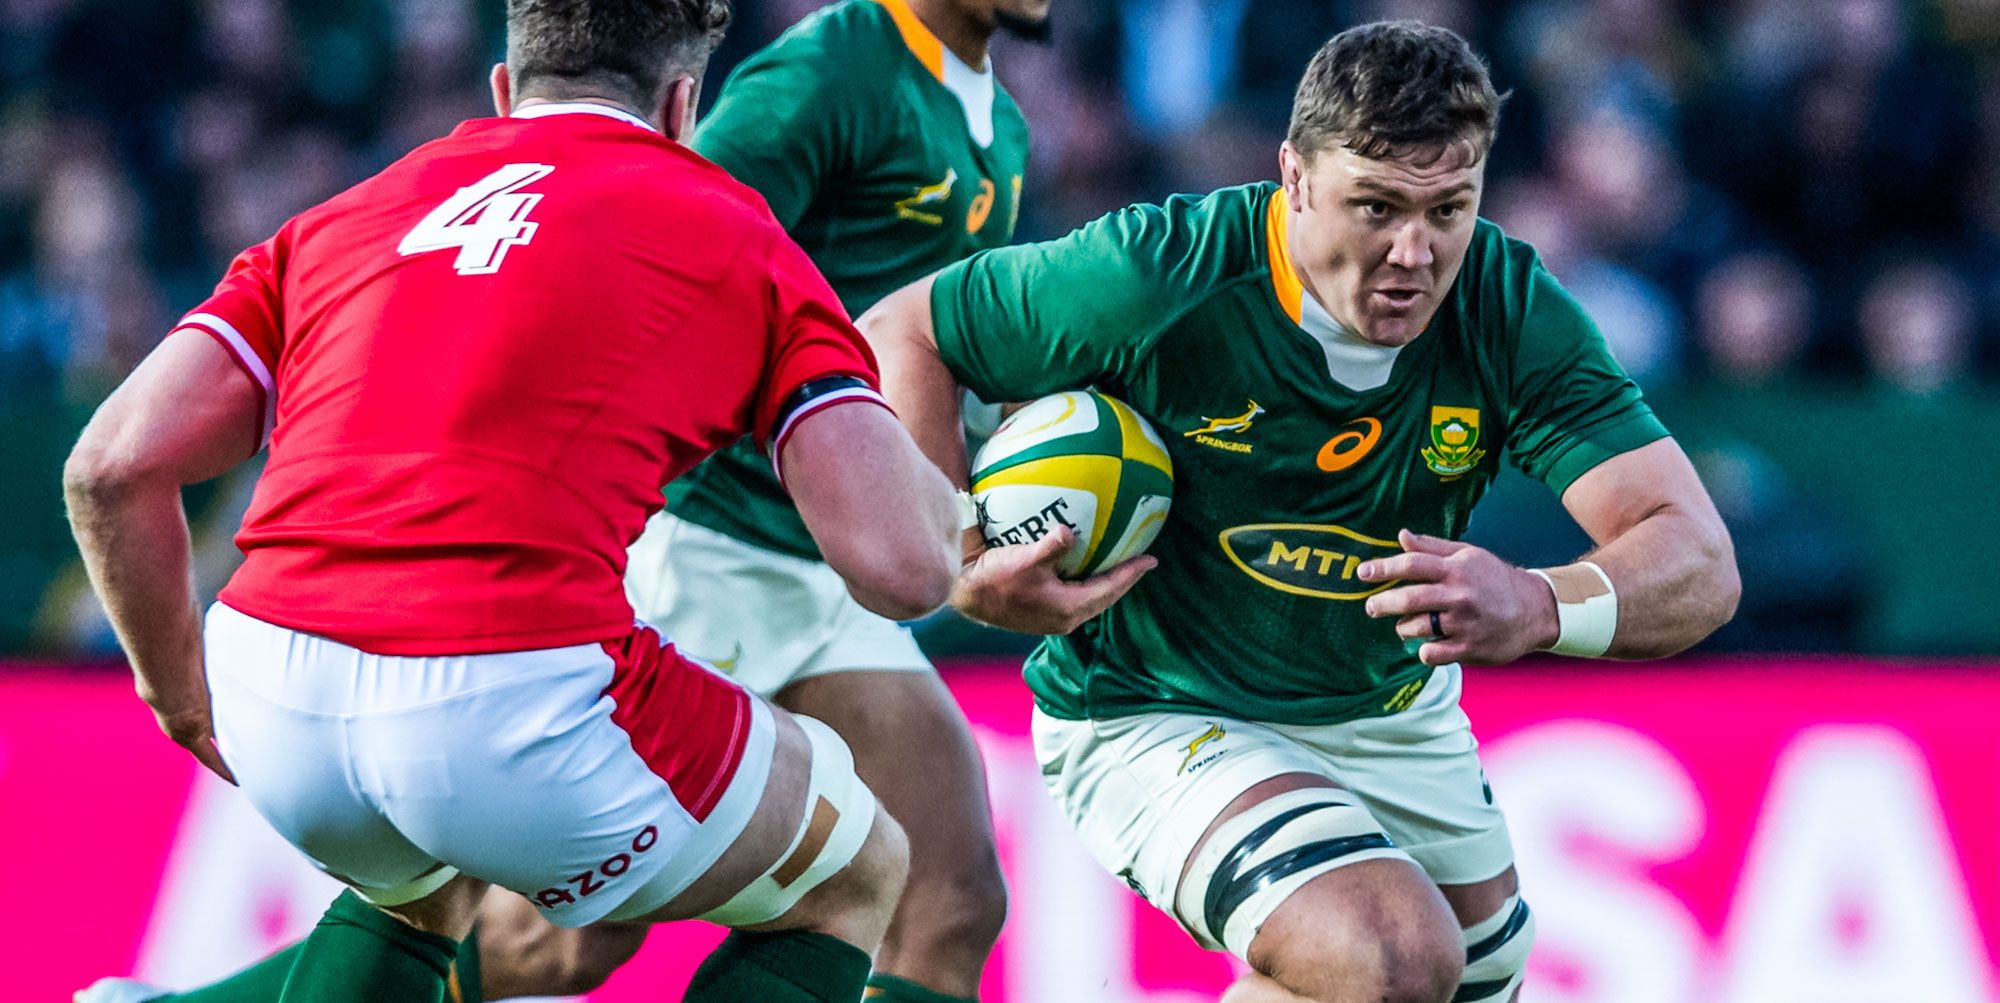 Player ratings: Who stood out – and who flopped – for the Springboks